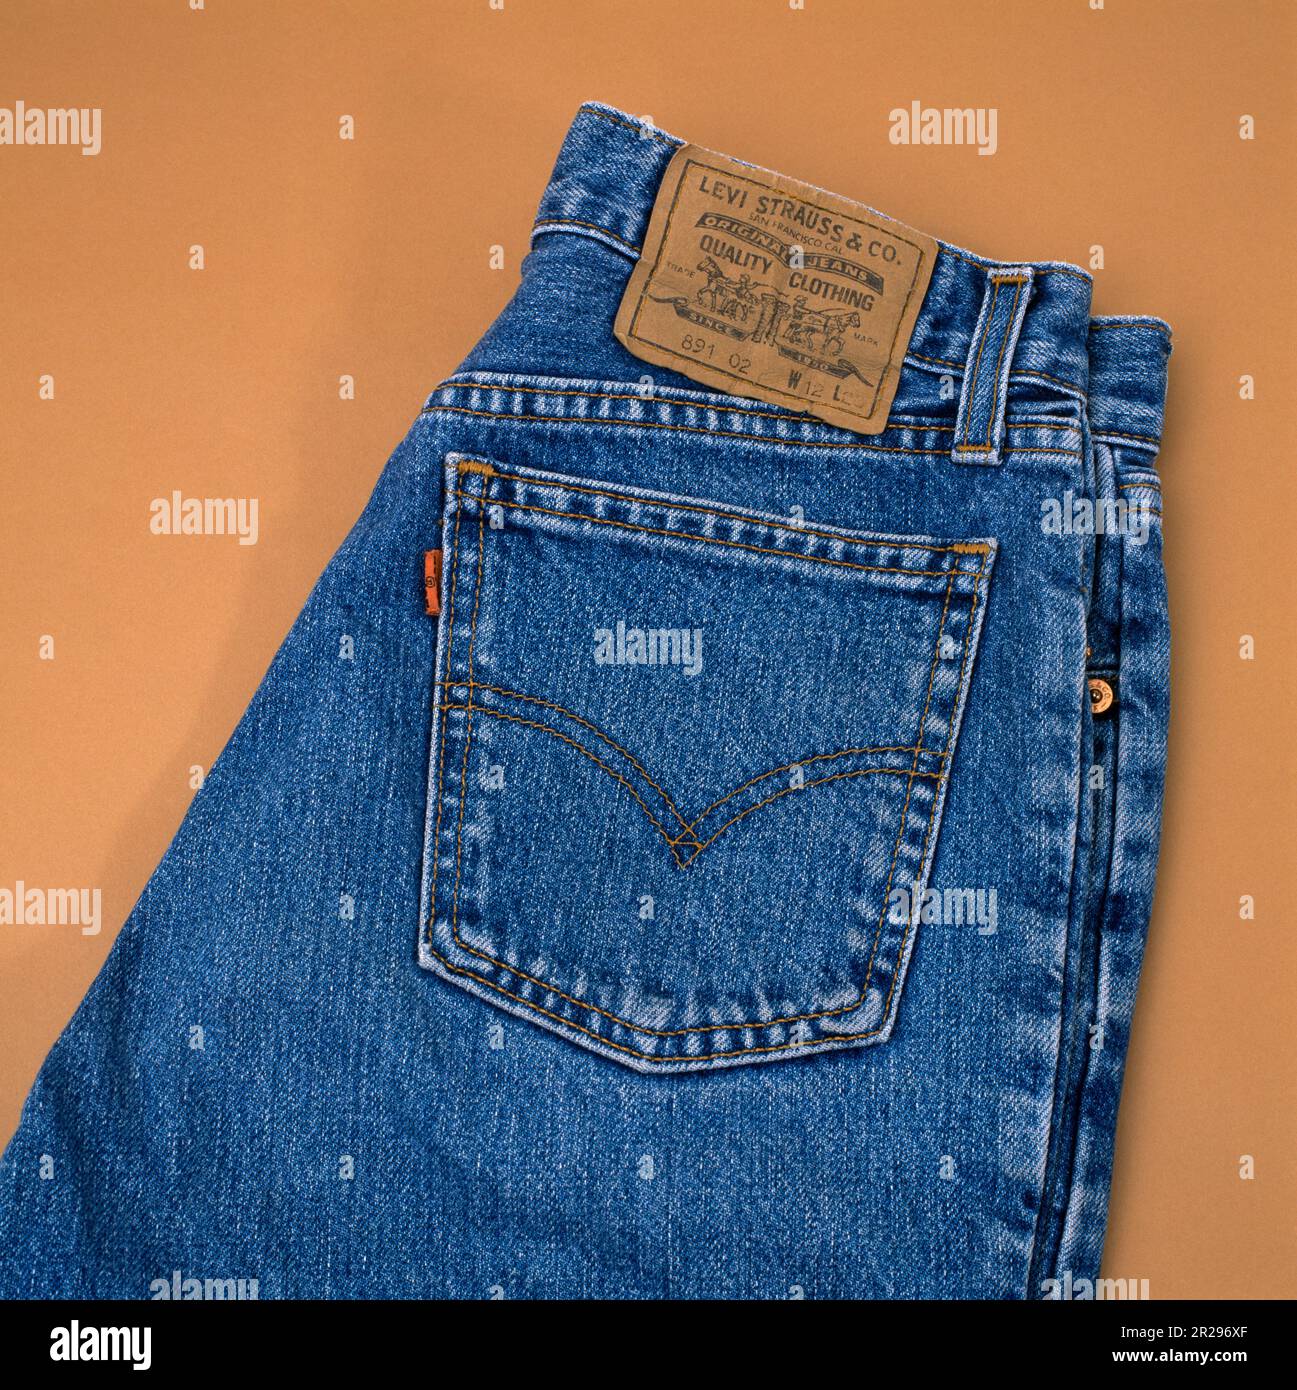 A Pair of Levi Strauss Original Jeans 518 showing Label and Pocket Stock Photo